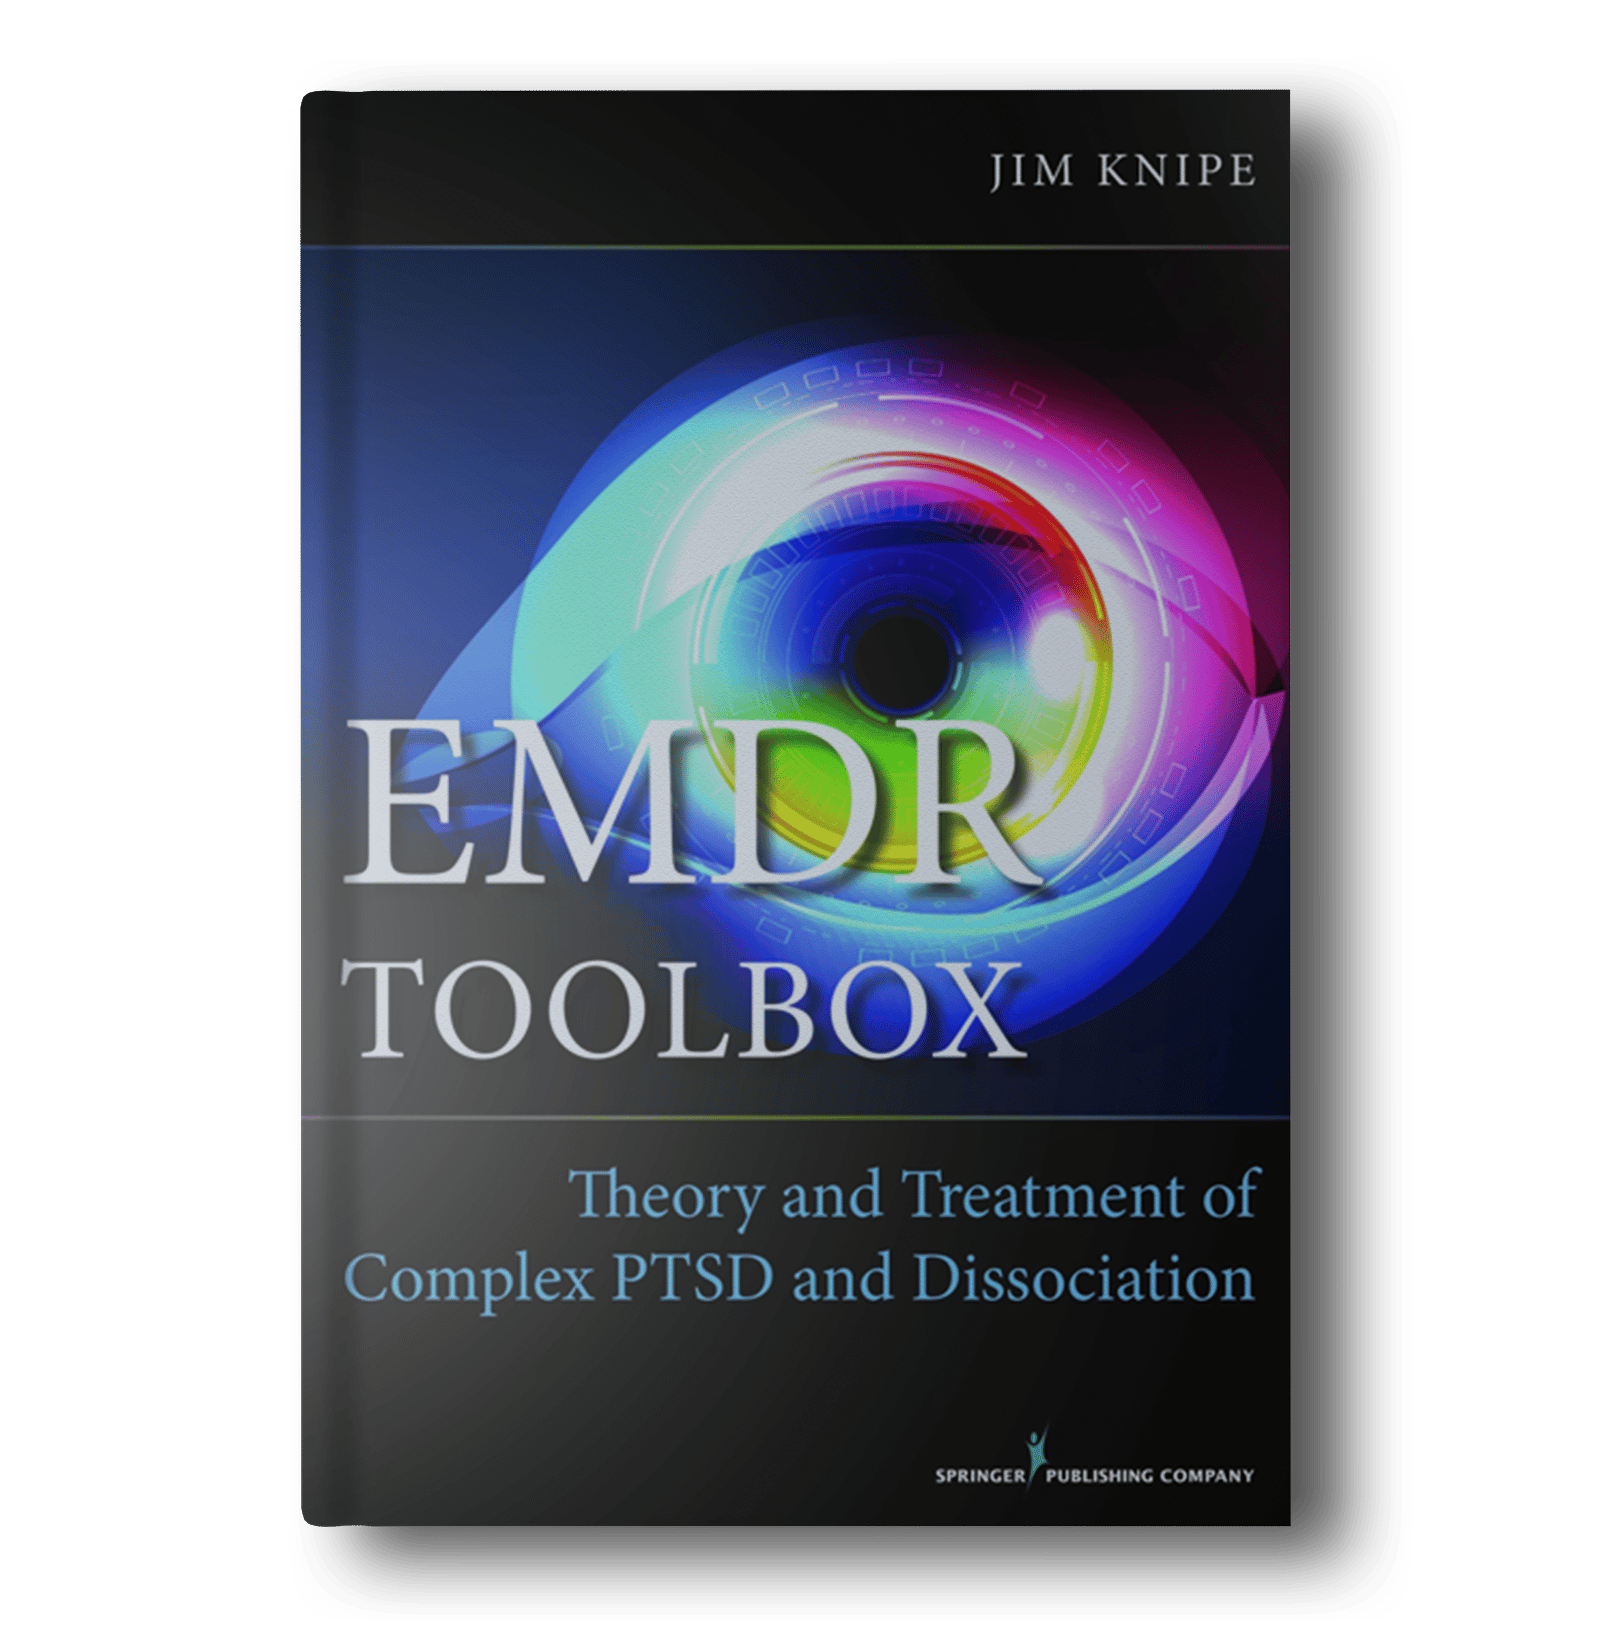 EMDR Toolbox: Theory and Treatment of Complex PTSD and Dissociation ...